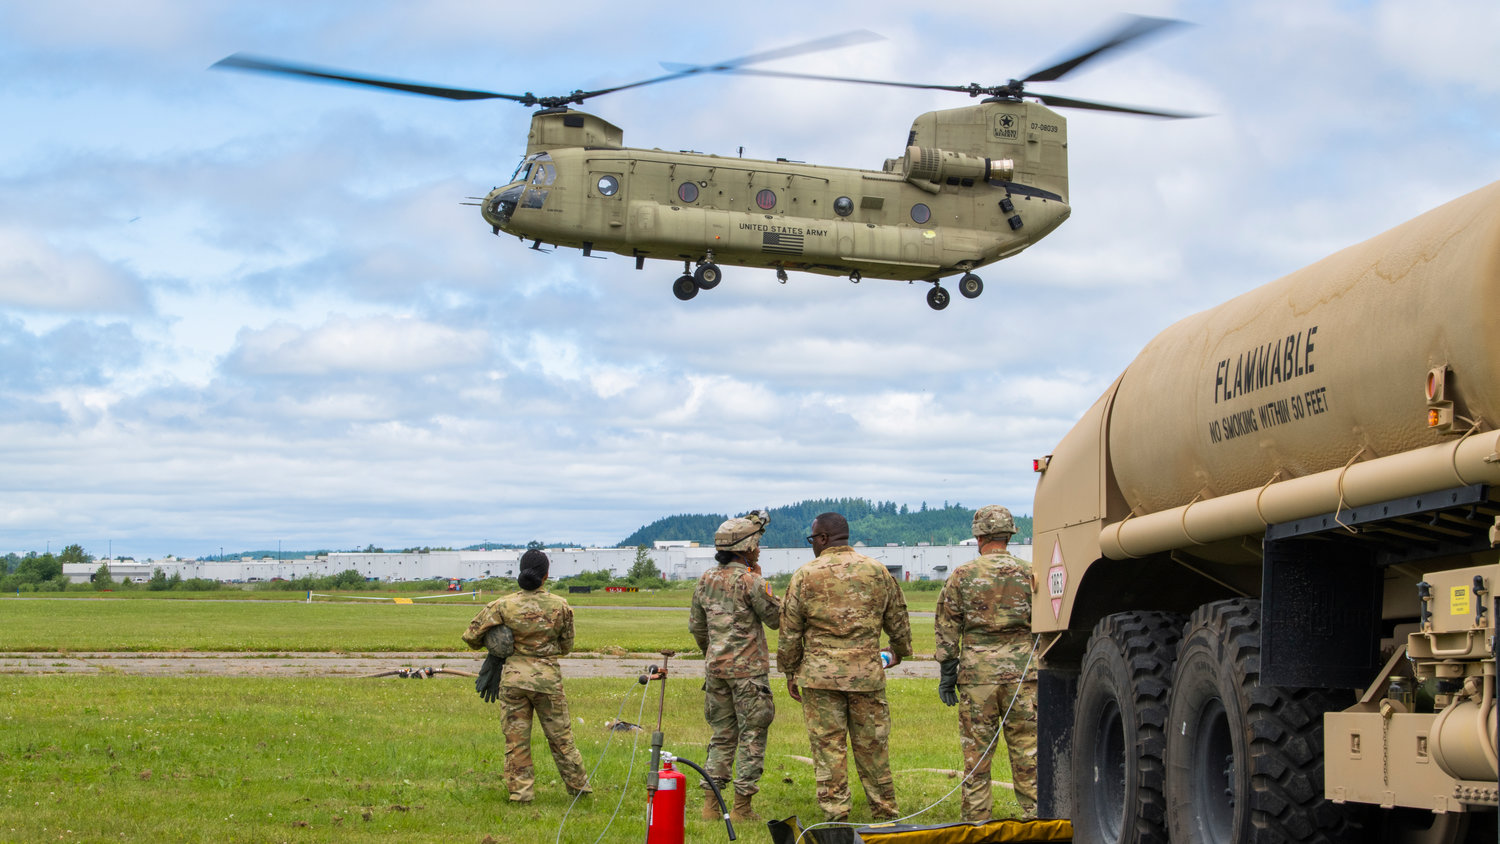 Members of the United States Army from Joint Base Lewis-McChord watch as a Chinook helicopter prepares to land at the Chehalis-Centralia Airport during a military training exercise on Wednesday, June 22.